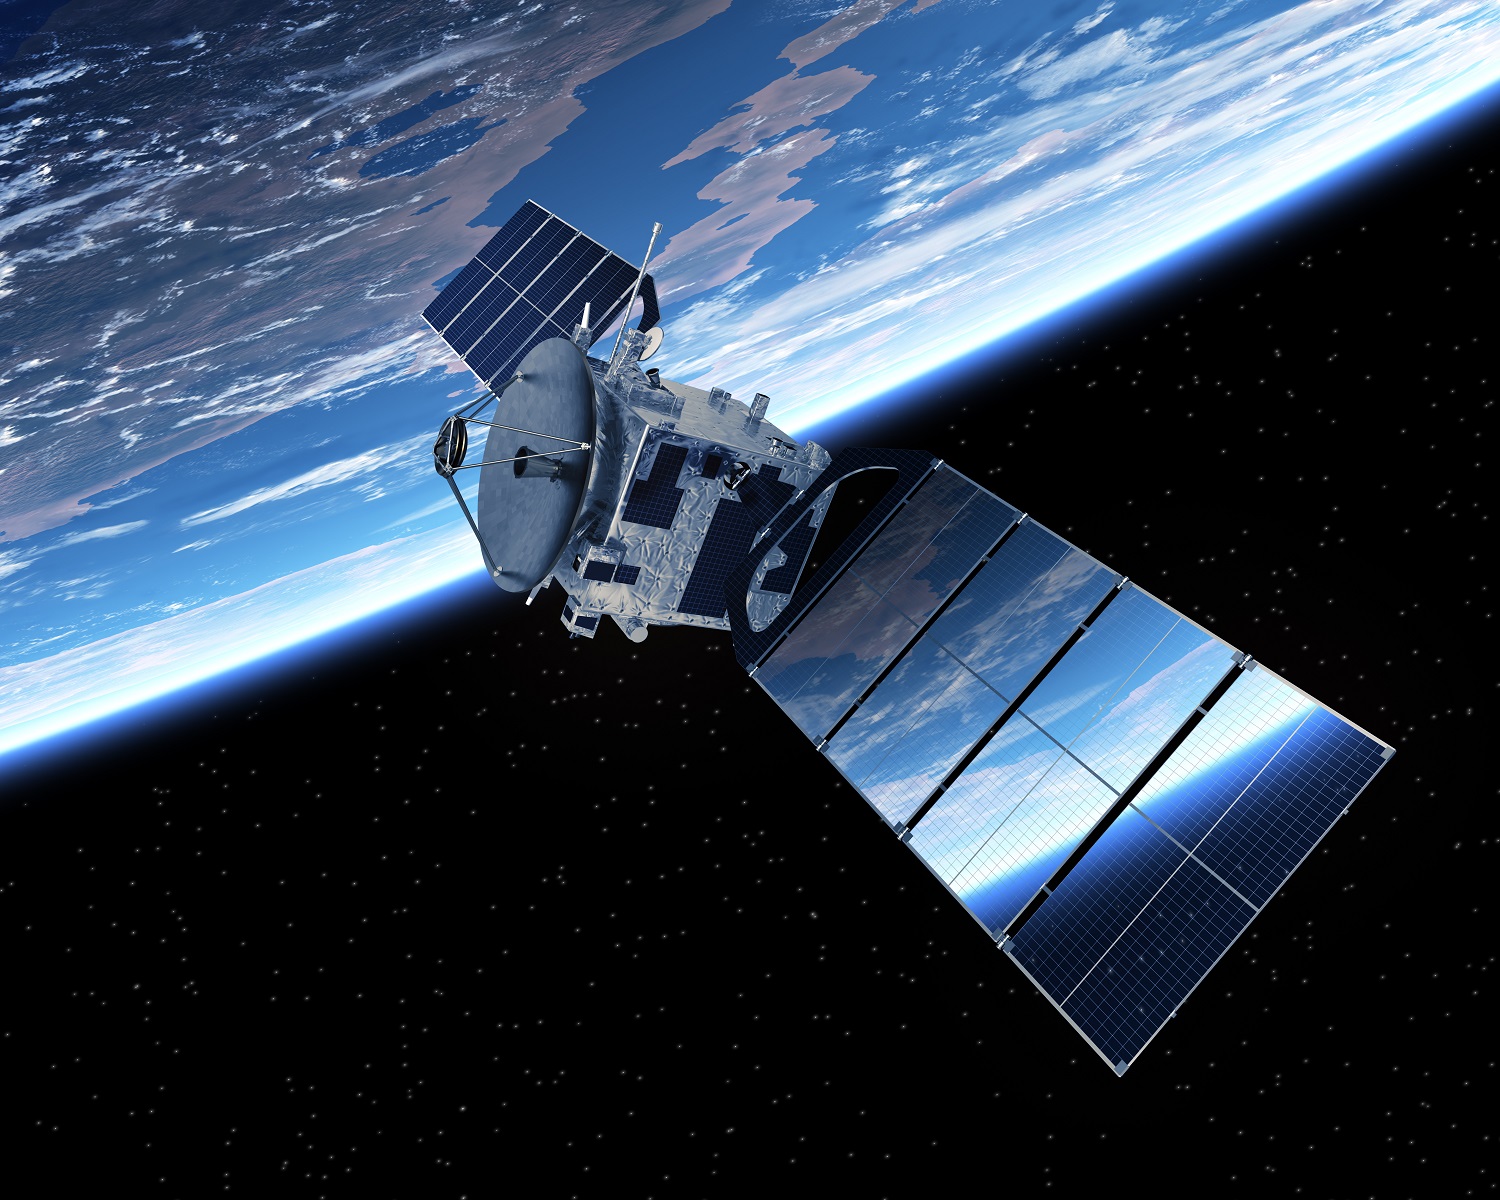 Image of satellite in space